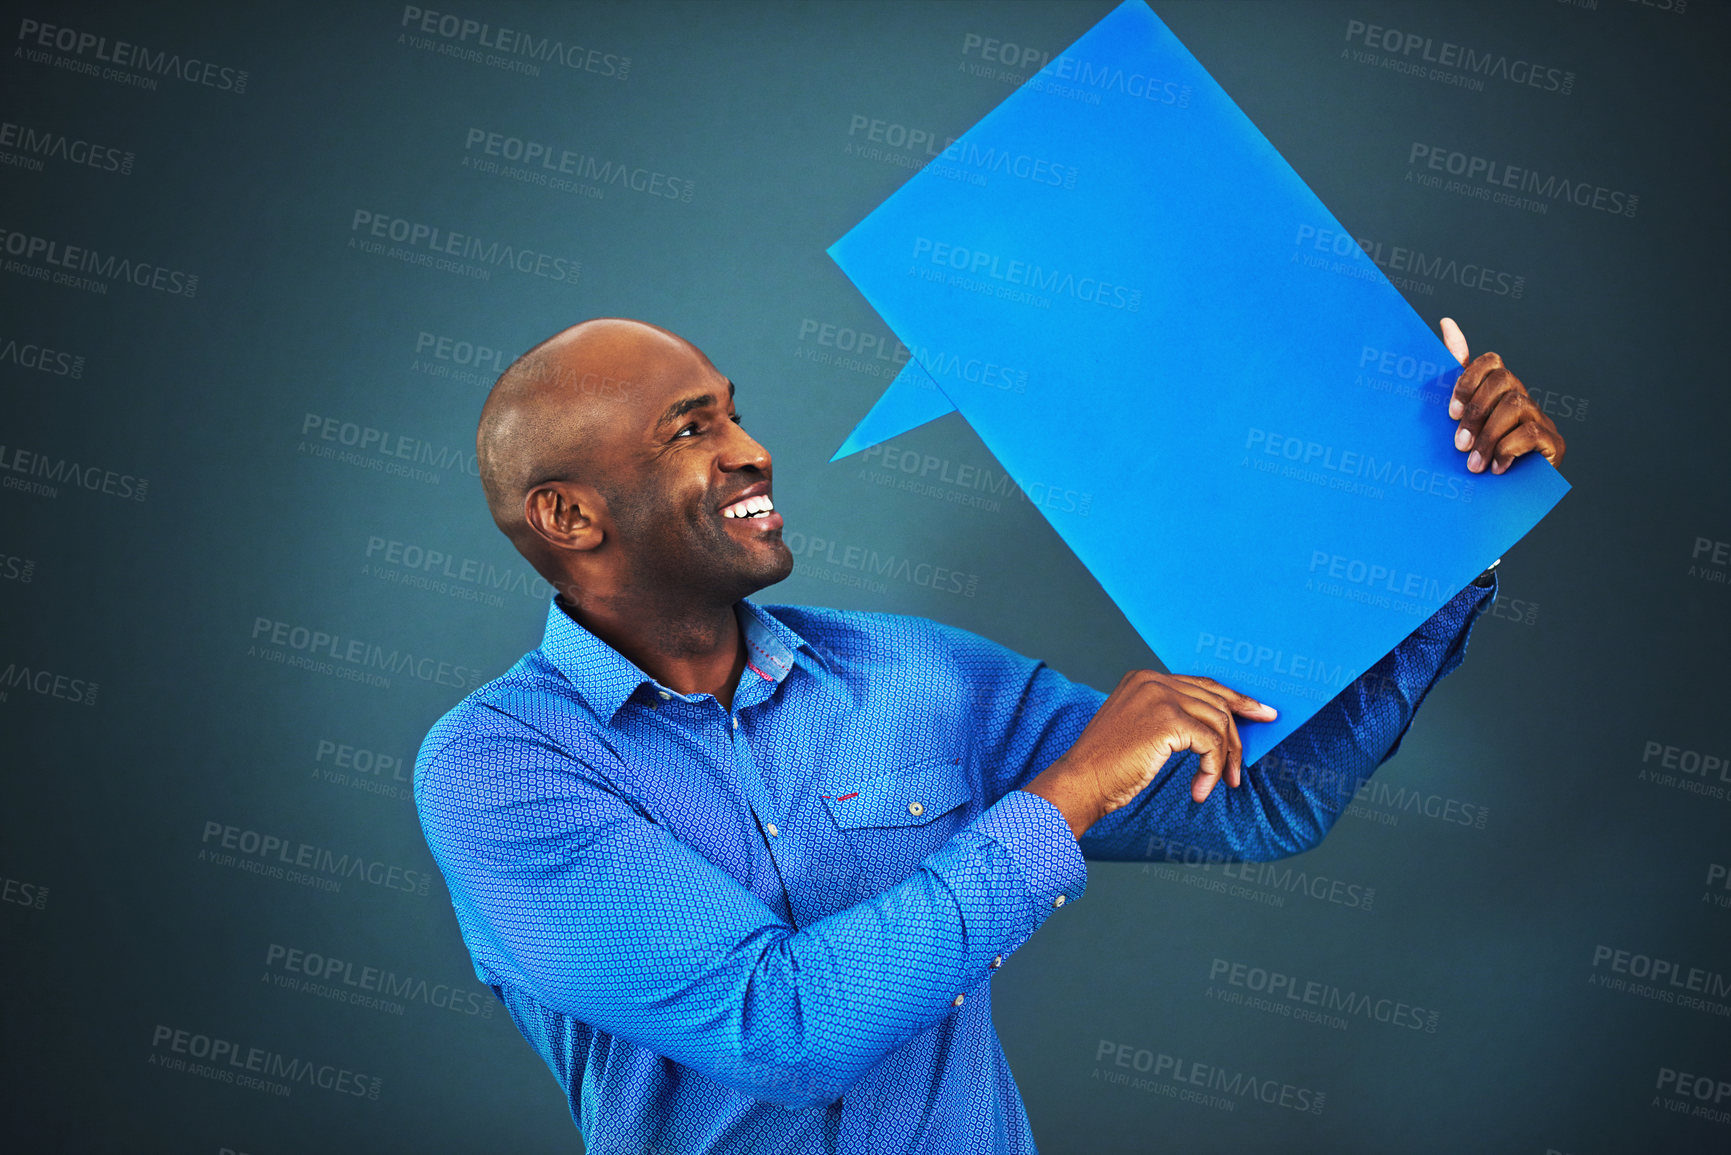 Buy stock photo Studio shot of a man holding a speech bubble against a blue background